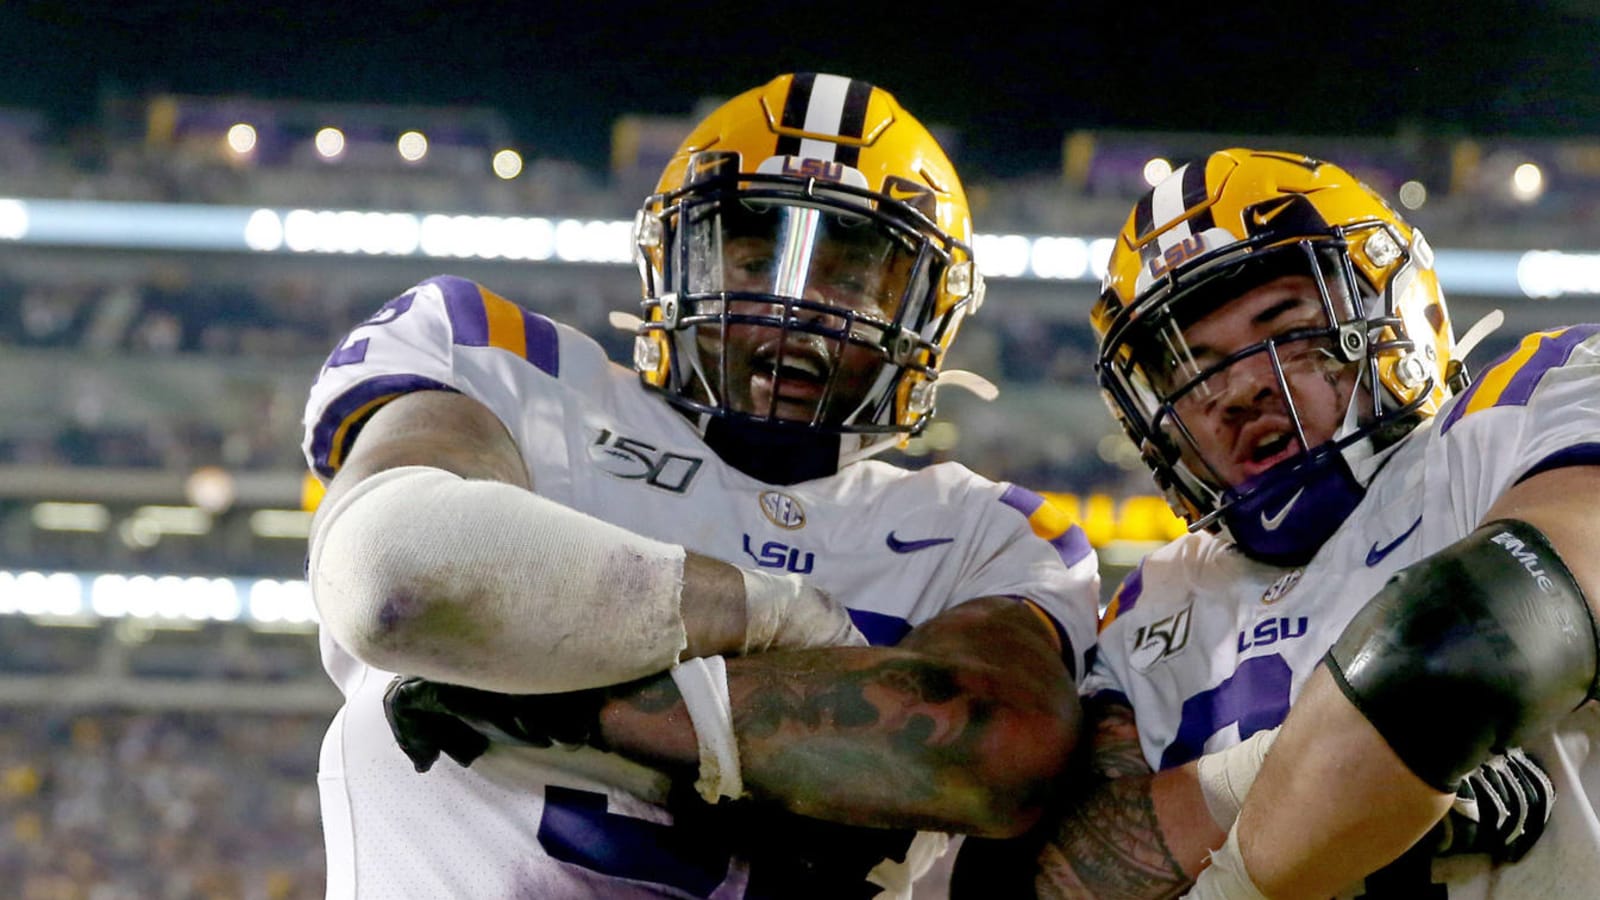 Reports: LSU's Neil Farrell expected to opt back in, play in 2020